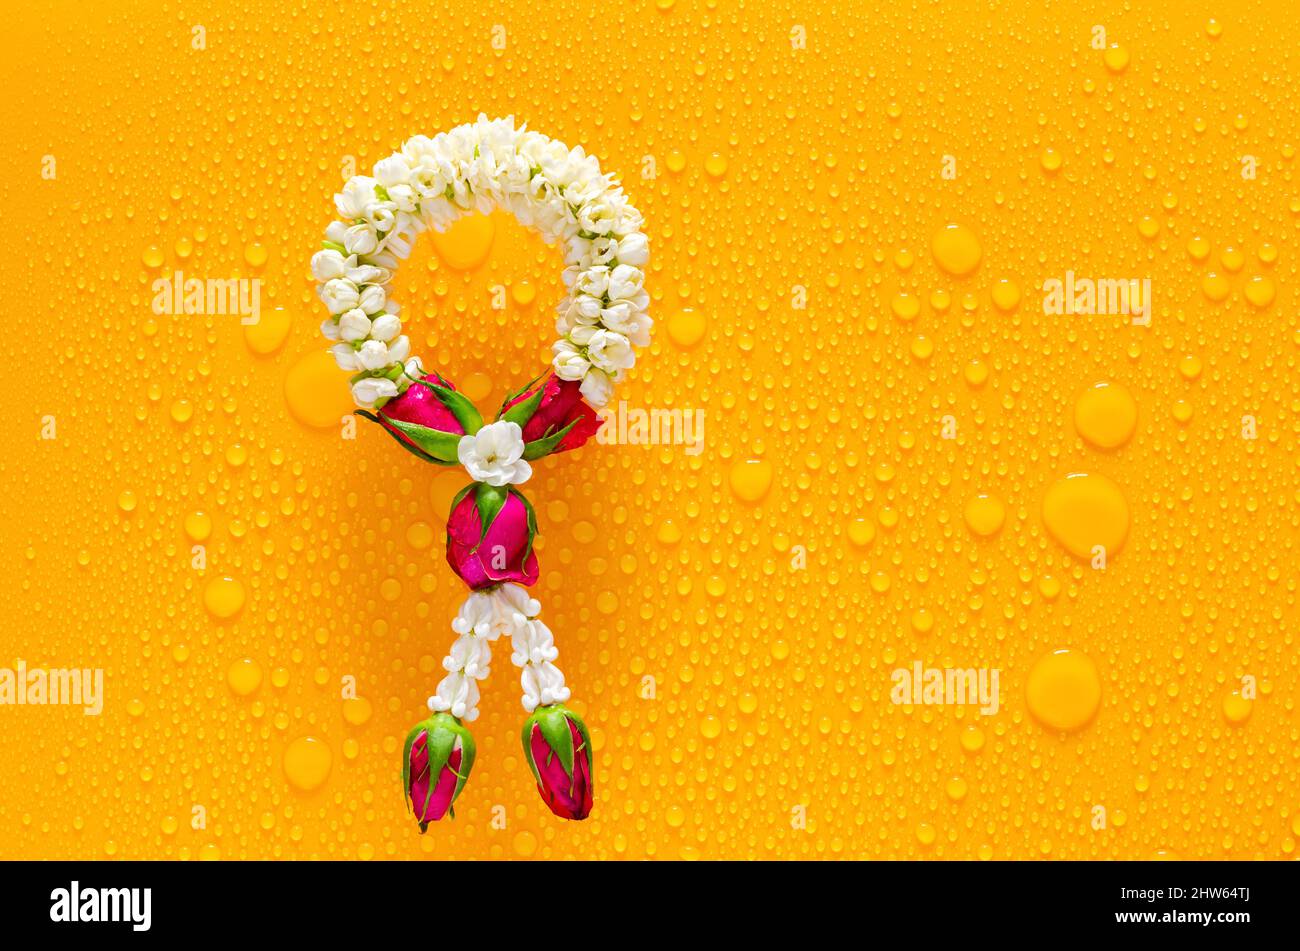 Jasmine garland puts on clear mirror that have wet yellow background below for Songkran festival concept. Stock Photo